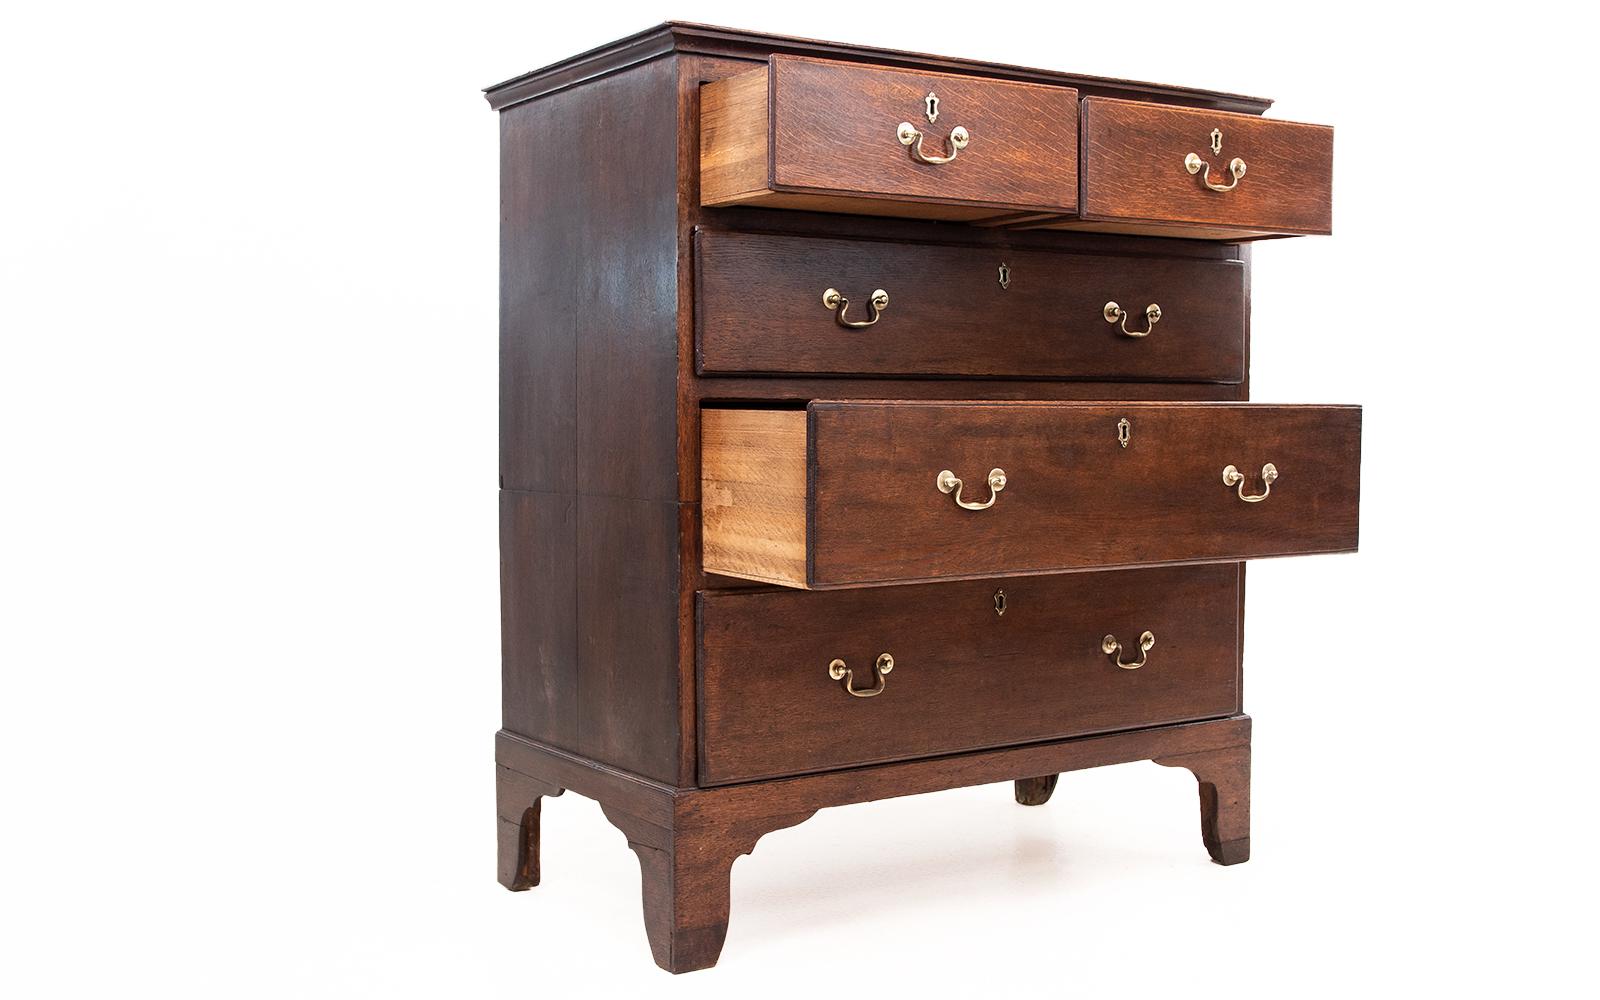 Late 19th Century Antique English Georgian Mahogany Chest of Drawers